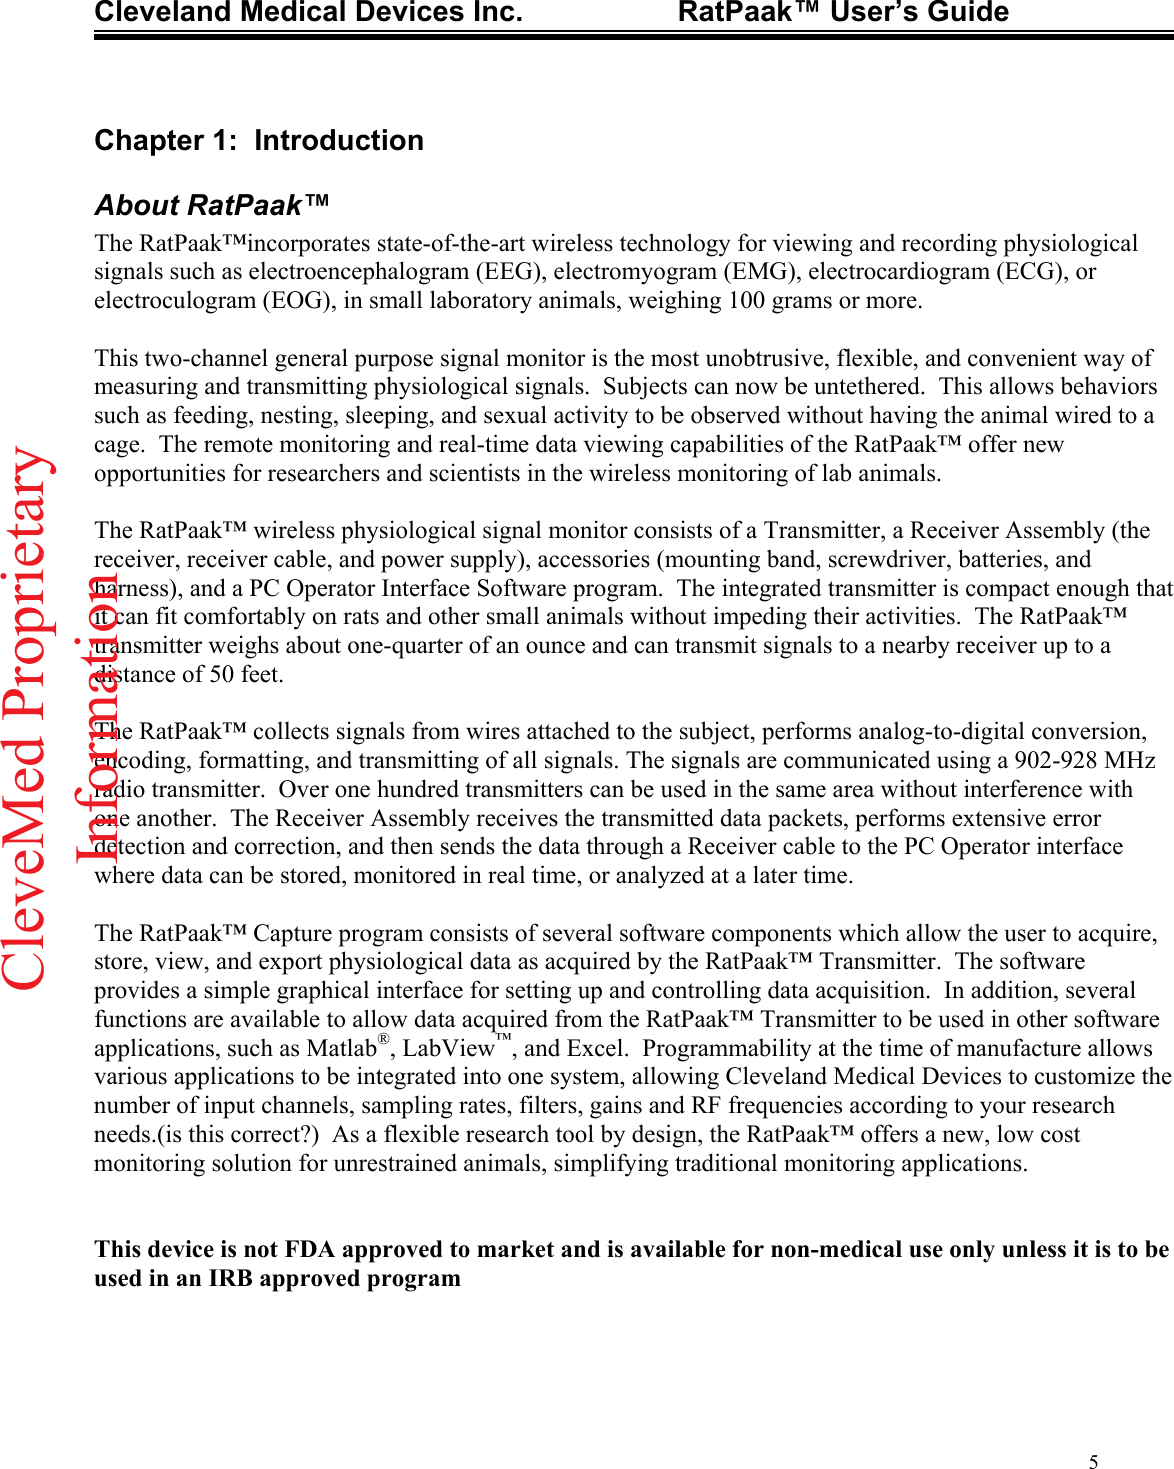 Cleveland Medical Devices Inc.                   RatPaak™ User’s Guide   Chapter 1:  Introduction About RatPaak™ The RatPaak™incorporates state-of-the-art wireless technology for viewing and recording physiological signals such as electroencephalogram (EEG), electromyogram (EMG), electrocardiogram (ECG), or electroculogram (EOG), in small laboratory animals, weighing 100 grams or more.    This two-channel general purpose signal monitor is the most unobtrusive, flexible, and convenient way of measuring and transmitting physiological signals.  Subjects can now be untethered.  This allows behaviors such as feeding, nesting, sleeping, and sexual activity to be observed without having the animal wired to a cage.  The remote monitoring and real-time data viewing capabilities of the RatPaak™ offer new opportunities for researchers and scientists in the wireless monitoring of lab animals.  The RatPaak™ wireless physiological signal monitor consists of a Transmitter, a Receiver Assembly (the receiver, receiver cable, and power supply), accessories (mounting band, screwdriver, batteries, and harness), and a PC Operator Interface Software program.  The integrated transmitter is compact enough that it can fit comfortably on rats and other small animals without impeding their activities.  The RatPaak™ transmitter weighs about one-quarter of an ounce and can transmit signals to a nearby receiver up to a distance of 50 feet.    The RatPaak™ collects signals from wires attached to the subject, performs analog-to-digital conversion, encoding, formatting, and transmitting of all signals. The signals are communicated using a 902-928 MHz radio transmitter.  Over one hundred transmitters can be used in the same area without interference with one another.  The Receiver Assembly receives the transmitted data packets, performs extensive error detection and correction, and then sends the data through a Receiver cable to the PC Operator interface where data can be stored, monitored in real time, or analyzed at a later time.  The RatPaak™ Capture program consists of several software components which allow the user to acquire, store, view, and export physiological data as acquired by the RatPaak™ Transmitter.  The software provides a simple graphical interface for setting up and controlling data acquisition.  In addition, several functions are available to allow data acquired from the RatPaak™ Transmitter to be used in other software applications, such as Matlab®, LabView™, and Excel.  Programmability at the time of manufacture allows various applications to be integrated into one system, allowing Cleveland Medical Devices to customize the number of input channels, sampling rates, filters, gains and RF frequencies according to your research needs.(is this correct?)  As a flexible research tool by design, the RatPaak™ offers a new, low cost monitoring solution for unrestrained animals, simplifying traditional monitoring applications.   This device is not FDA approved to market and is available for non-medical use only unless it is to be used in an IRB approved program 5CleveMed ProprietaryInformation